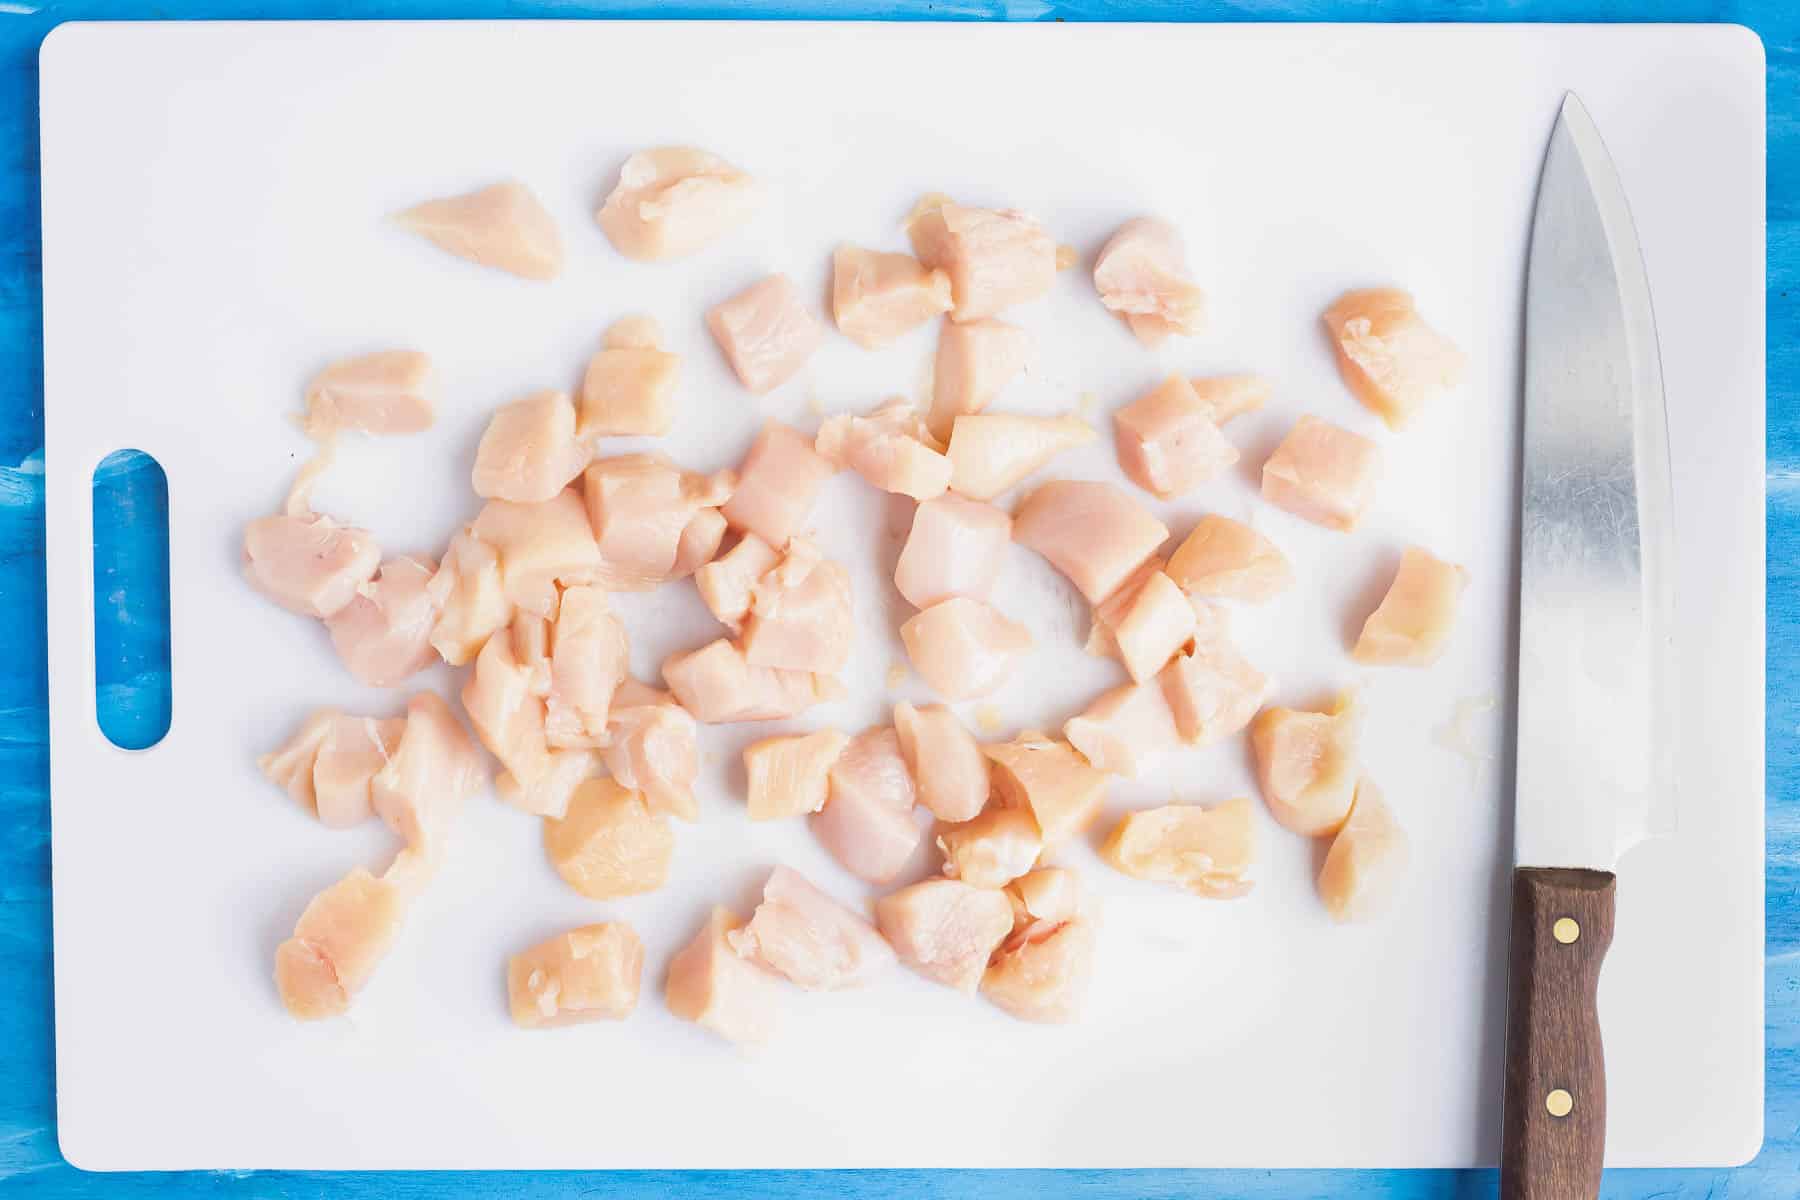 Chicken is cut into chunks.